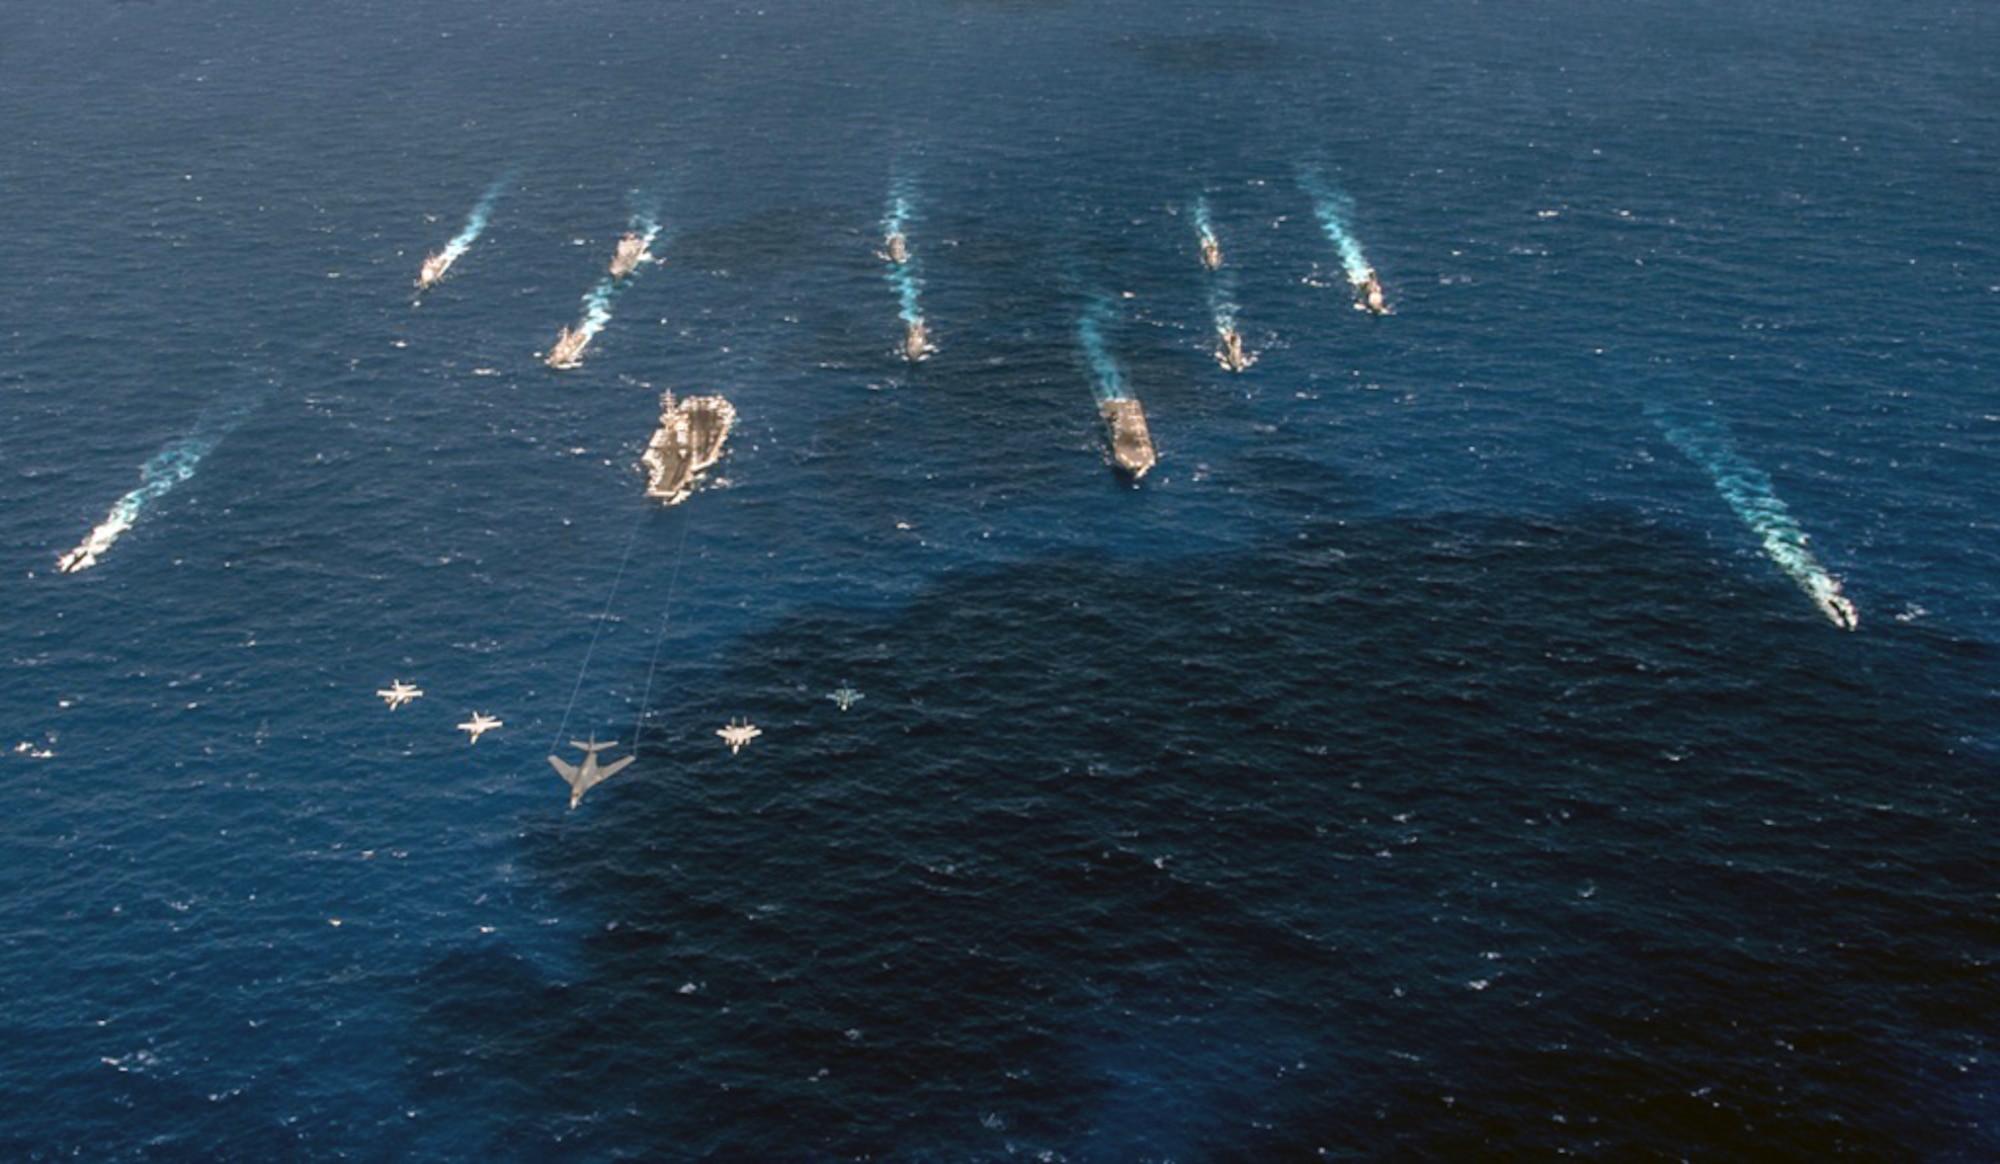 A B-1 bomber from the 34th Expeditionary Bomb Squadron leads a formation with fighters in front of U.S. Navy and Japanese surface vessels during Exercise Keen Sword 17, which took place Oct. 30 to Nov. 11, 2016, in the Pacific Ocean off the coasts of Japan, Guam and the Northern Mariana Islands. Keen Sword is a bilateral exercise between the Japanese Self-Defense Force and the United States designed to strengthen the Japan-U.S. alliance and increase combined combat readiness within the framework of the alliance.